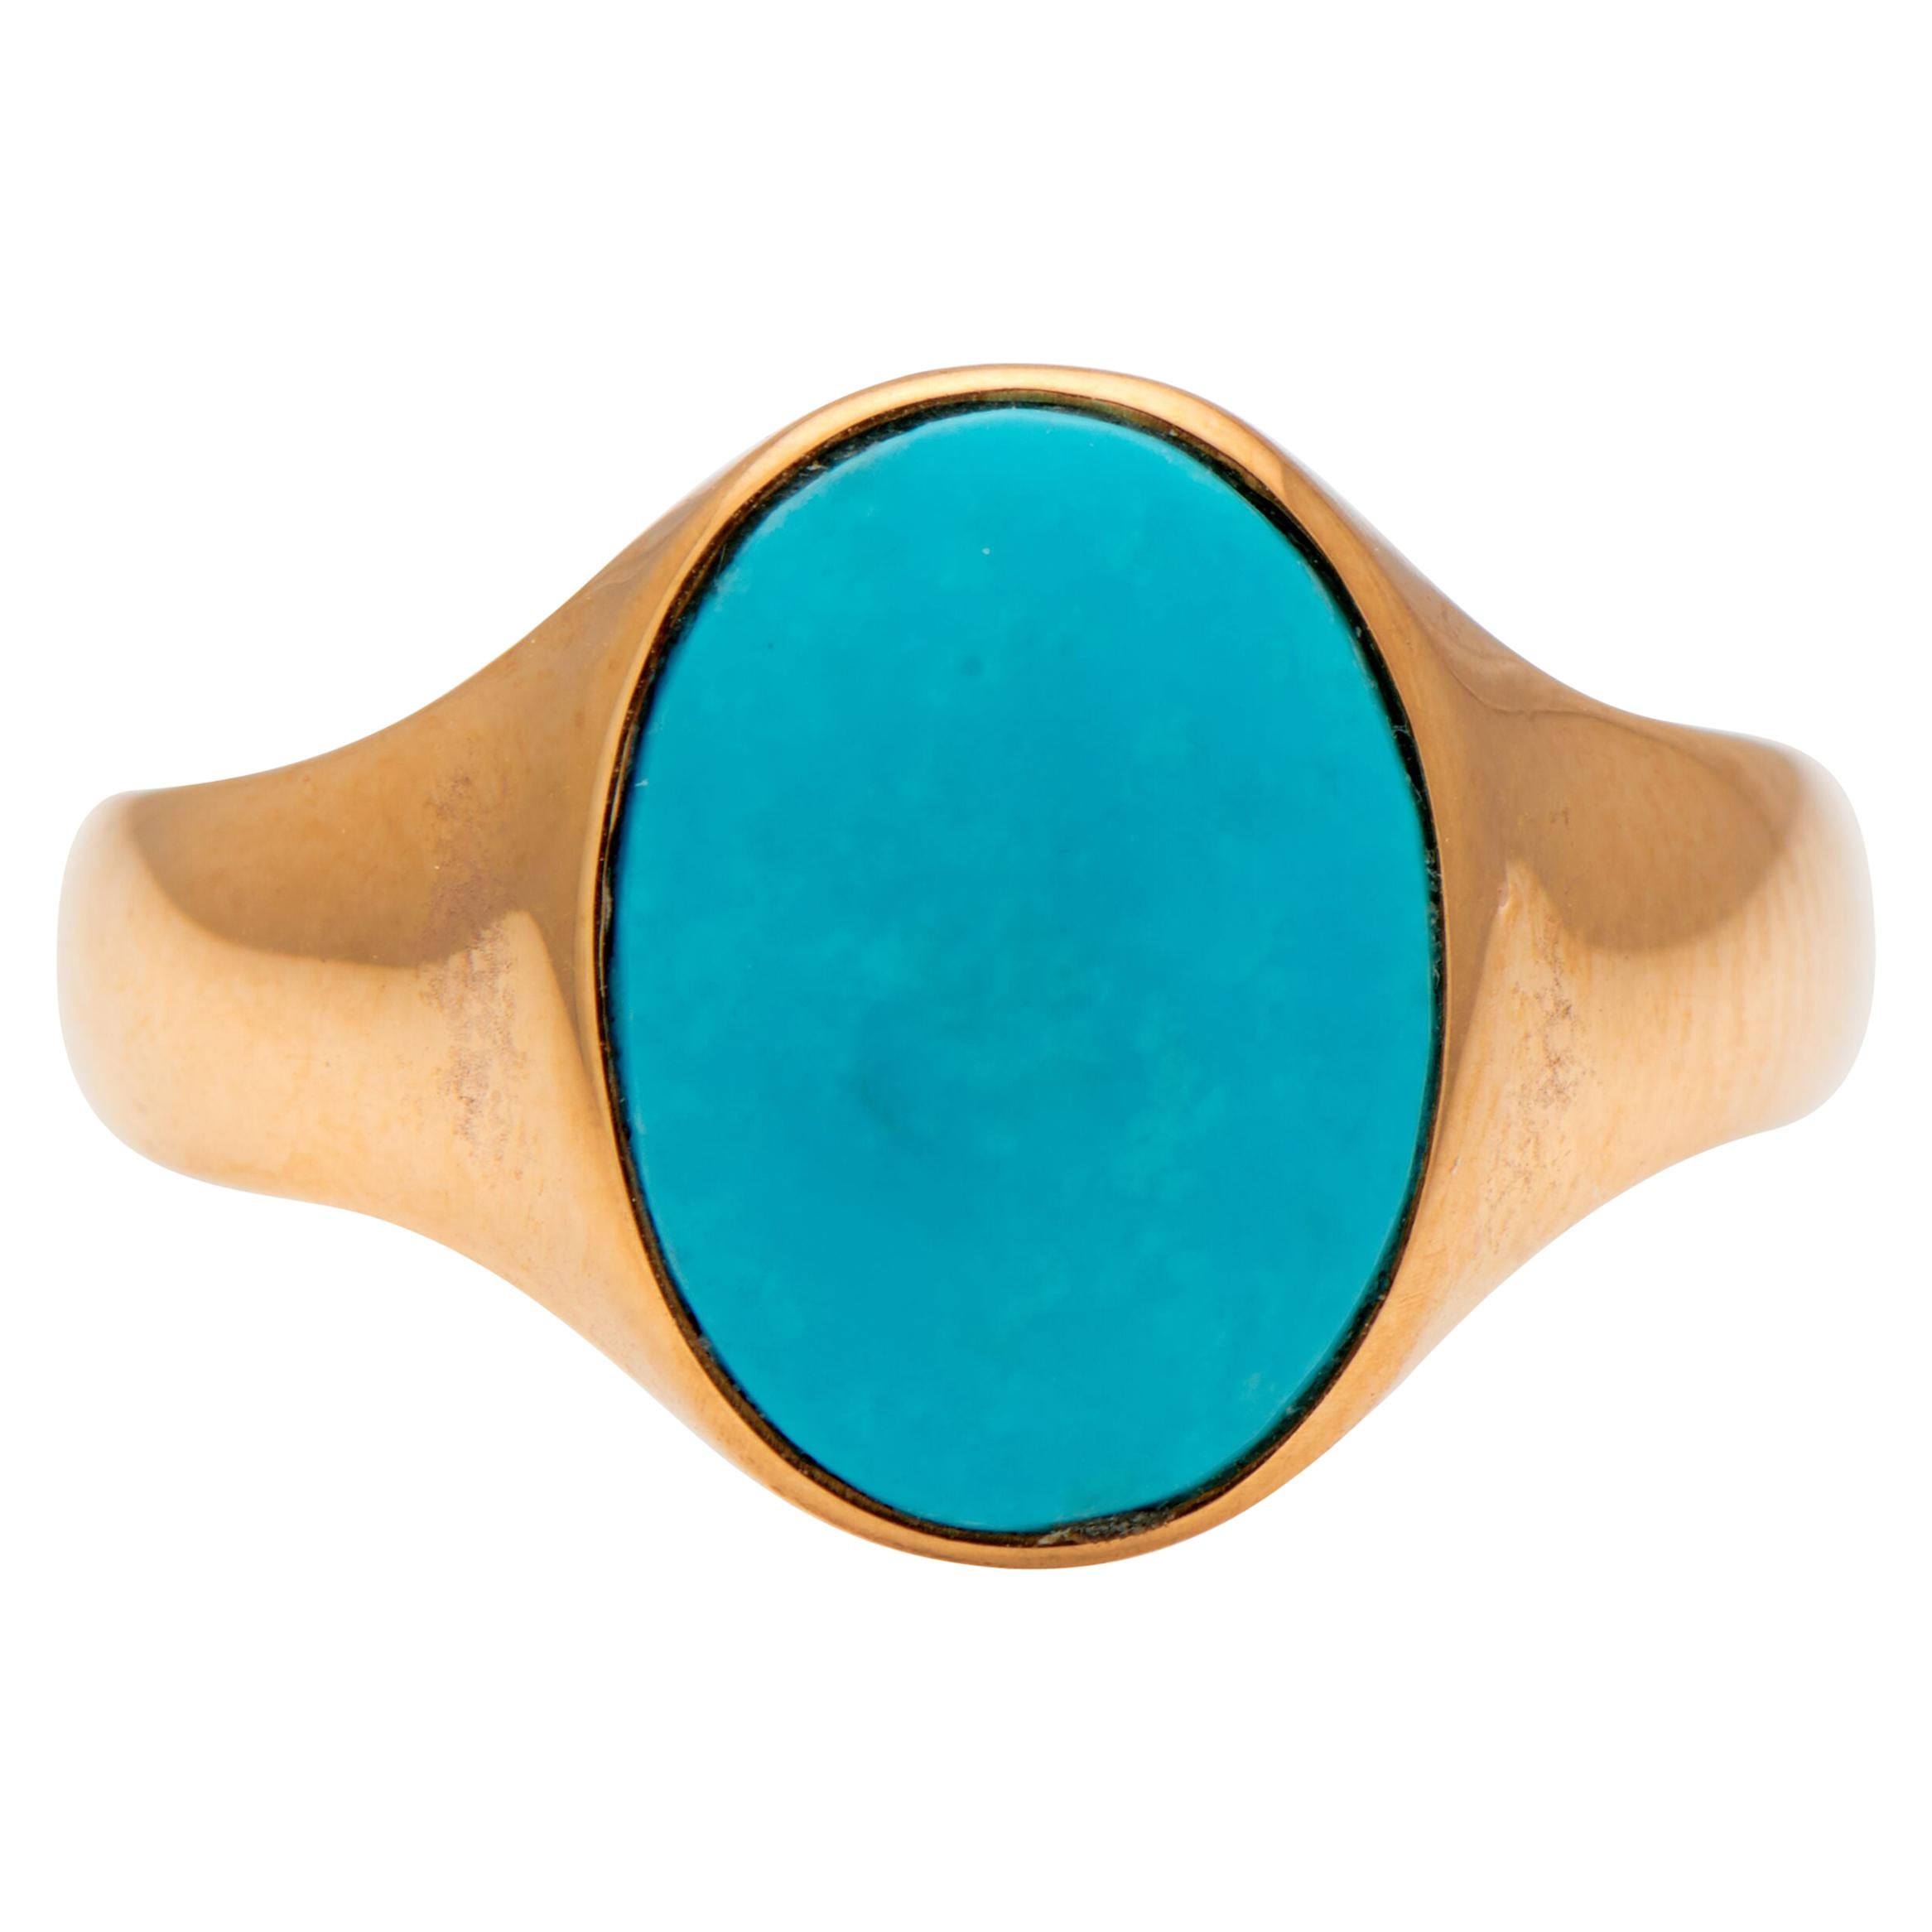 Antique, Art Deco, 14 Carat Yellow Gold, Oval Turquoise Signet Ring